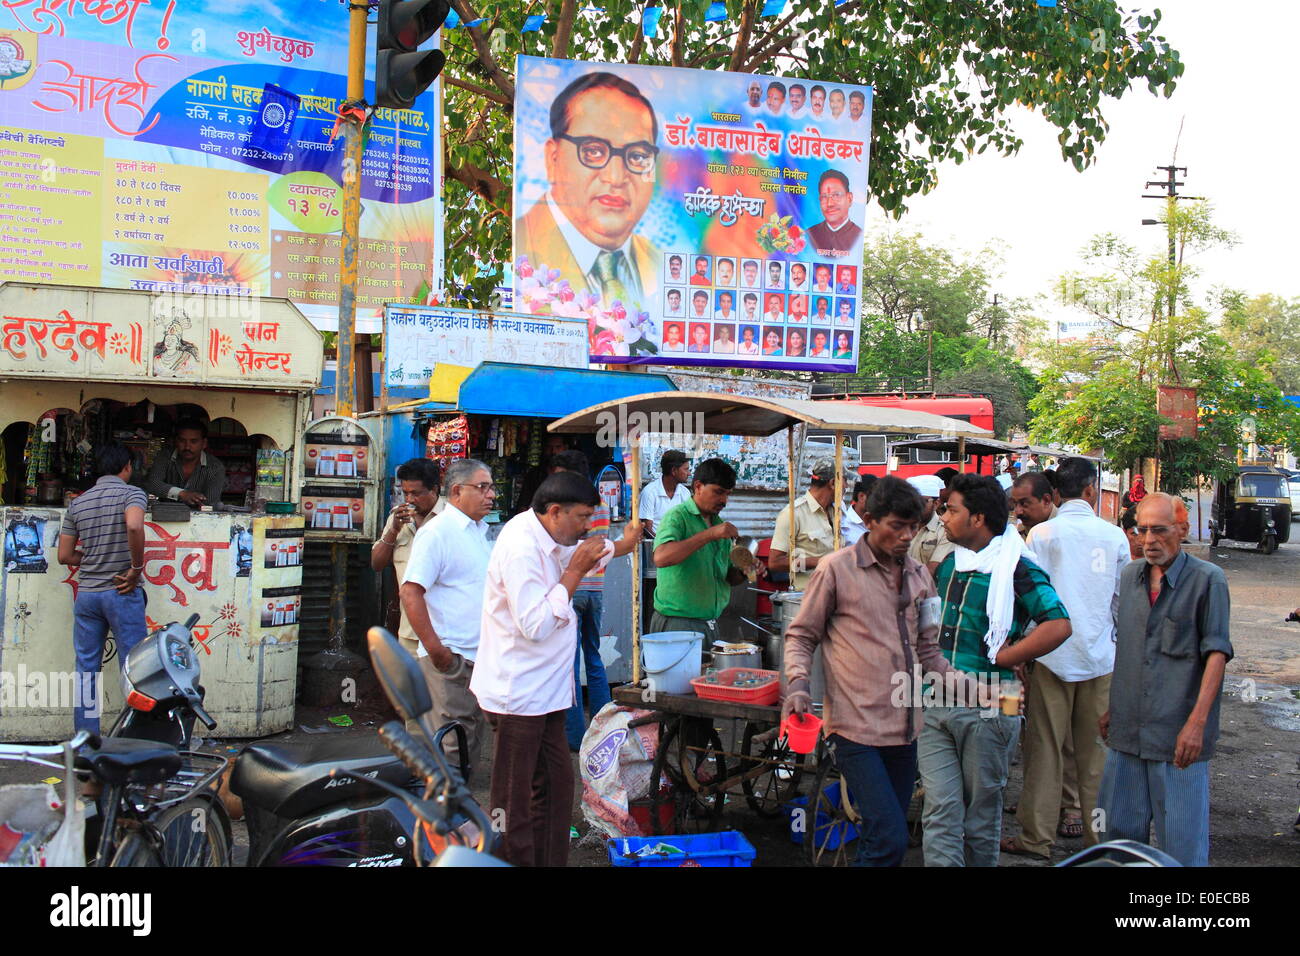 Yavatmal, Maharashtra, India. 16th Apr, 2014. Posters put up by Political Parties in praise of Dalit (lower caste) leaders like Dr. Babasaheb Ambedkar & Jyotiba Phule are intended to woo the Dalit & lower caste voters which play a significant role because of their large numbers. © Subhash Sharma/ZUMA Wire/ZUMAPRESS.com/Alamy Live News Stock Photo